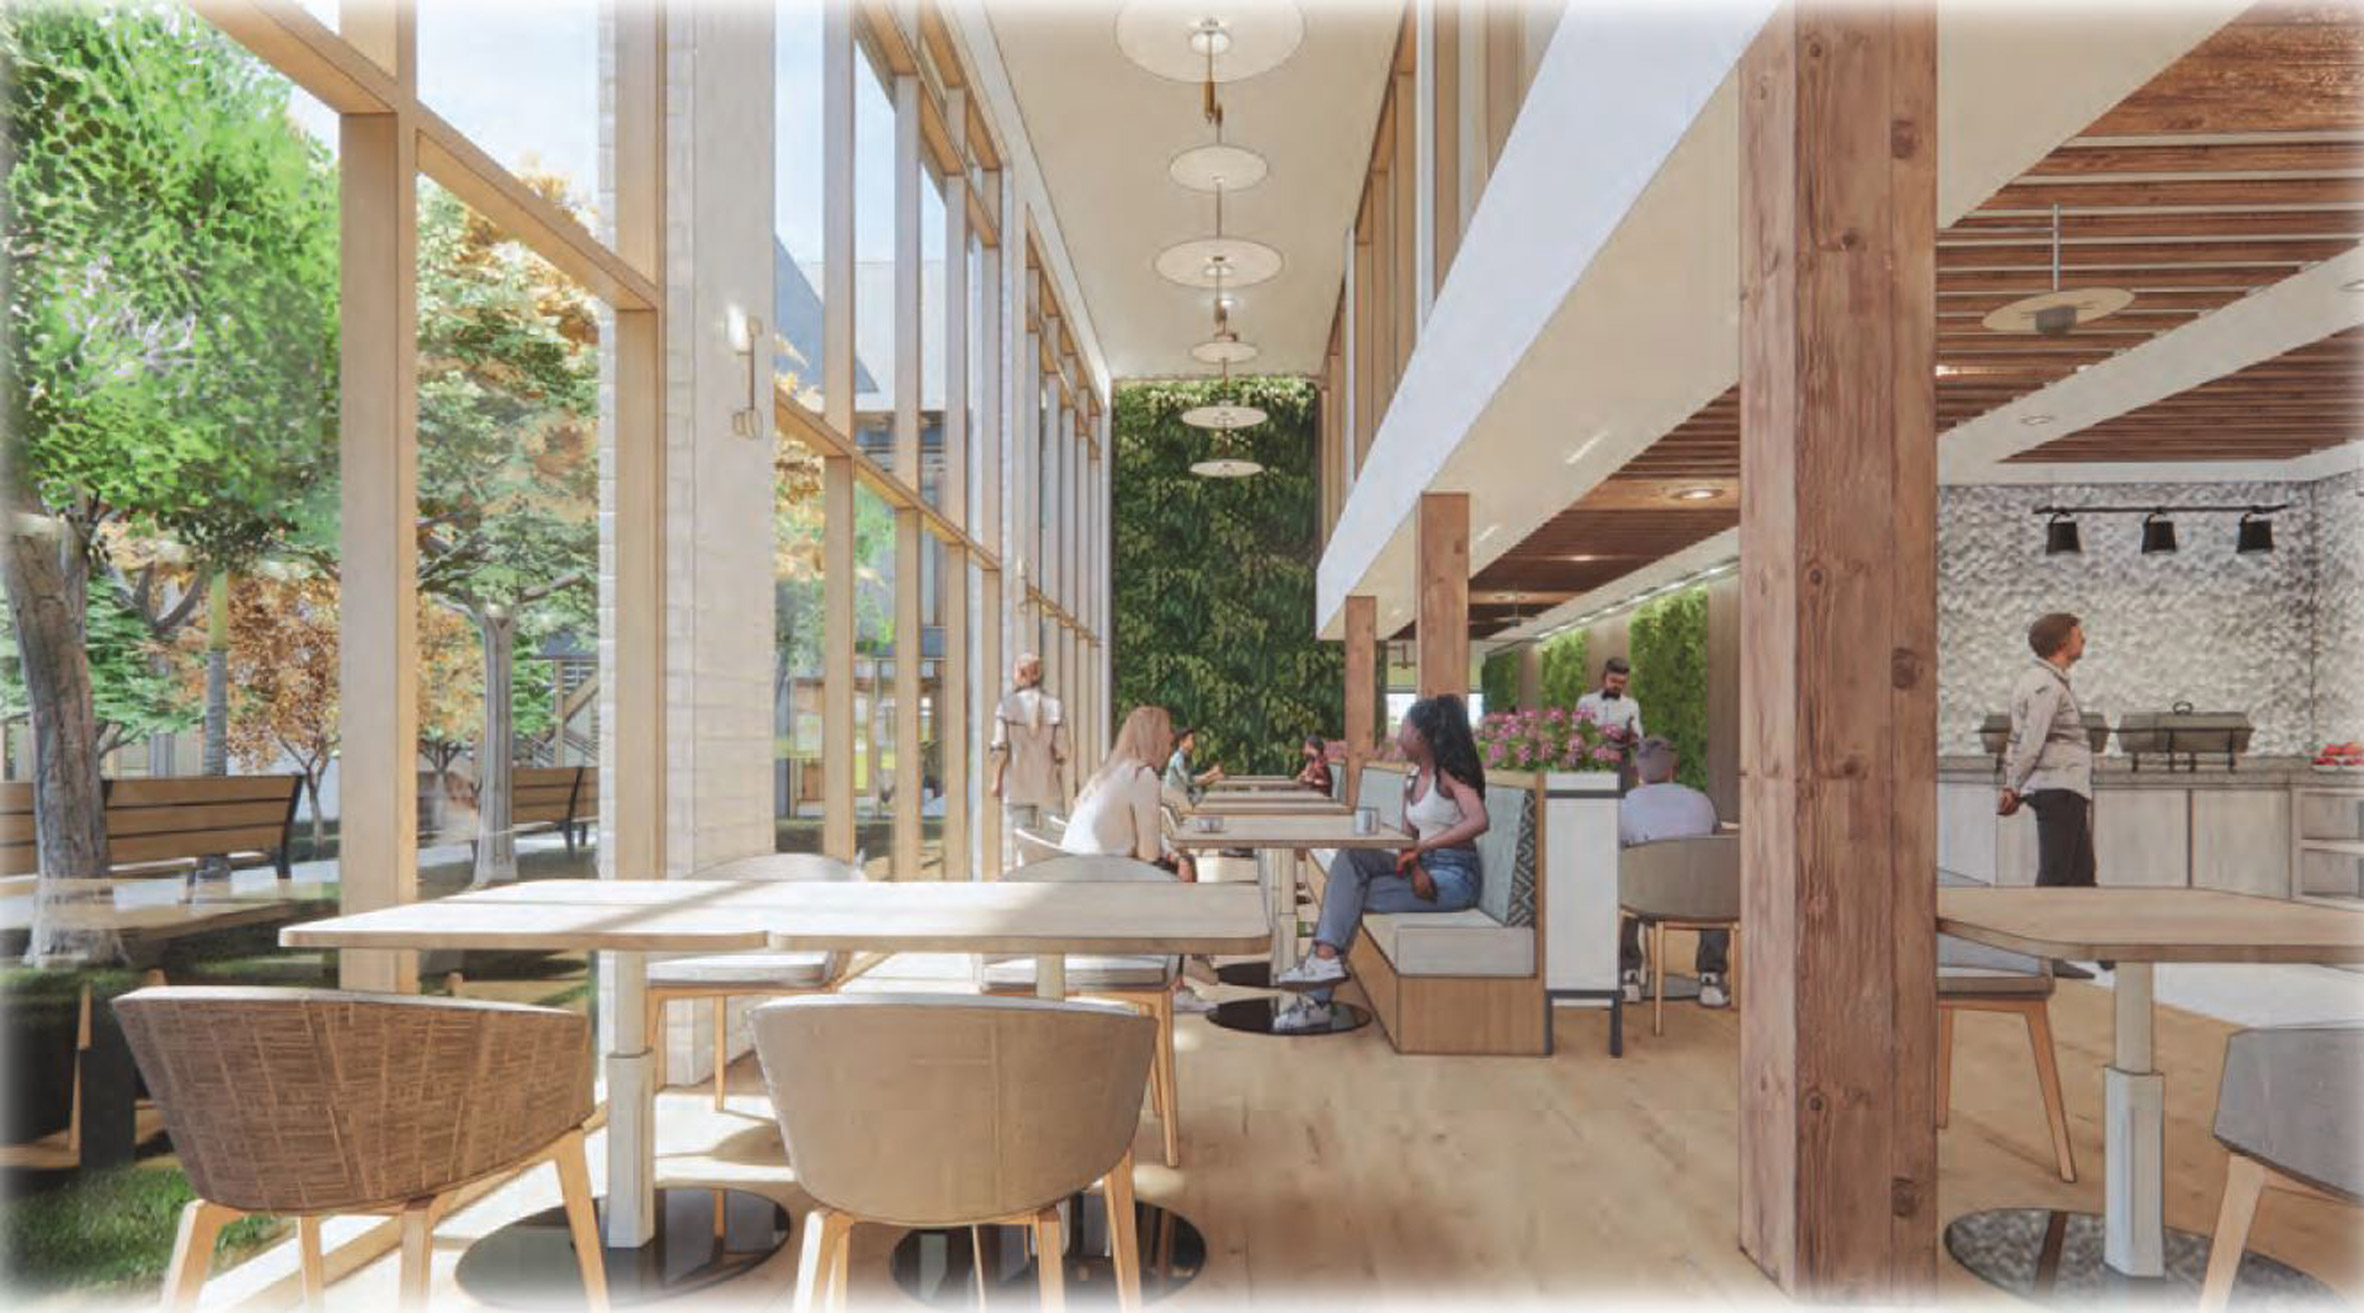 Interior render of a timber dining area by student at Drexel University